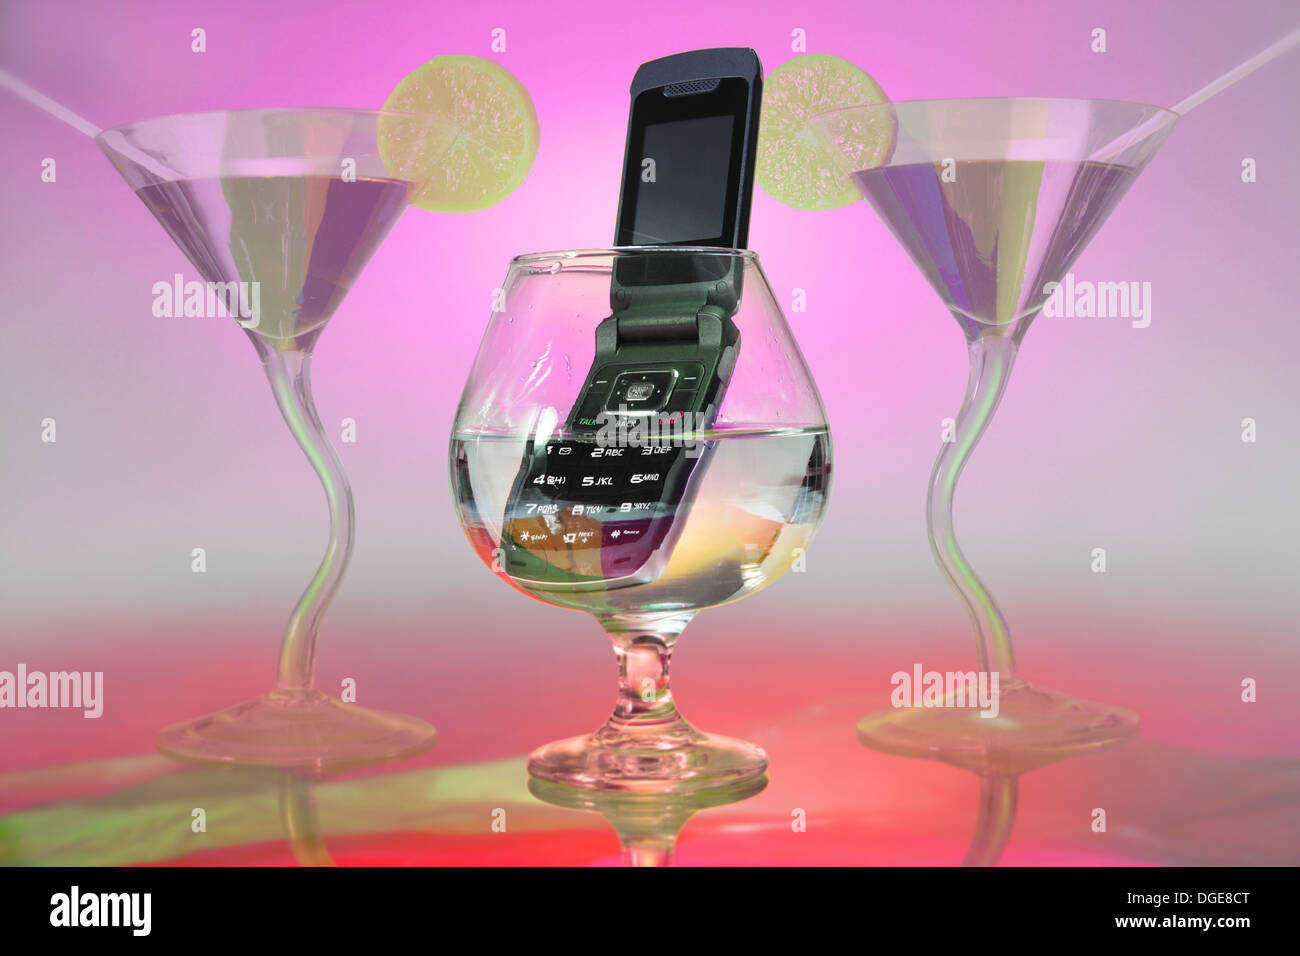 In the middle, you see a brandy glass in which a cell phone is immersed. two cocktail glasses frame the scene Stock Photo